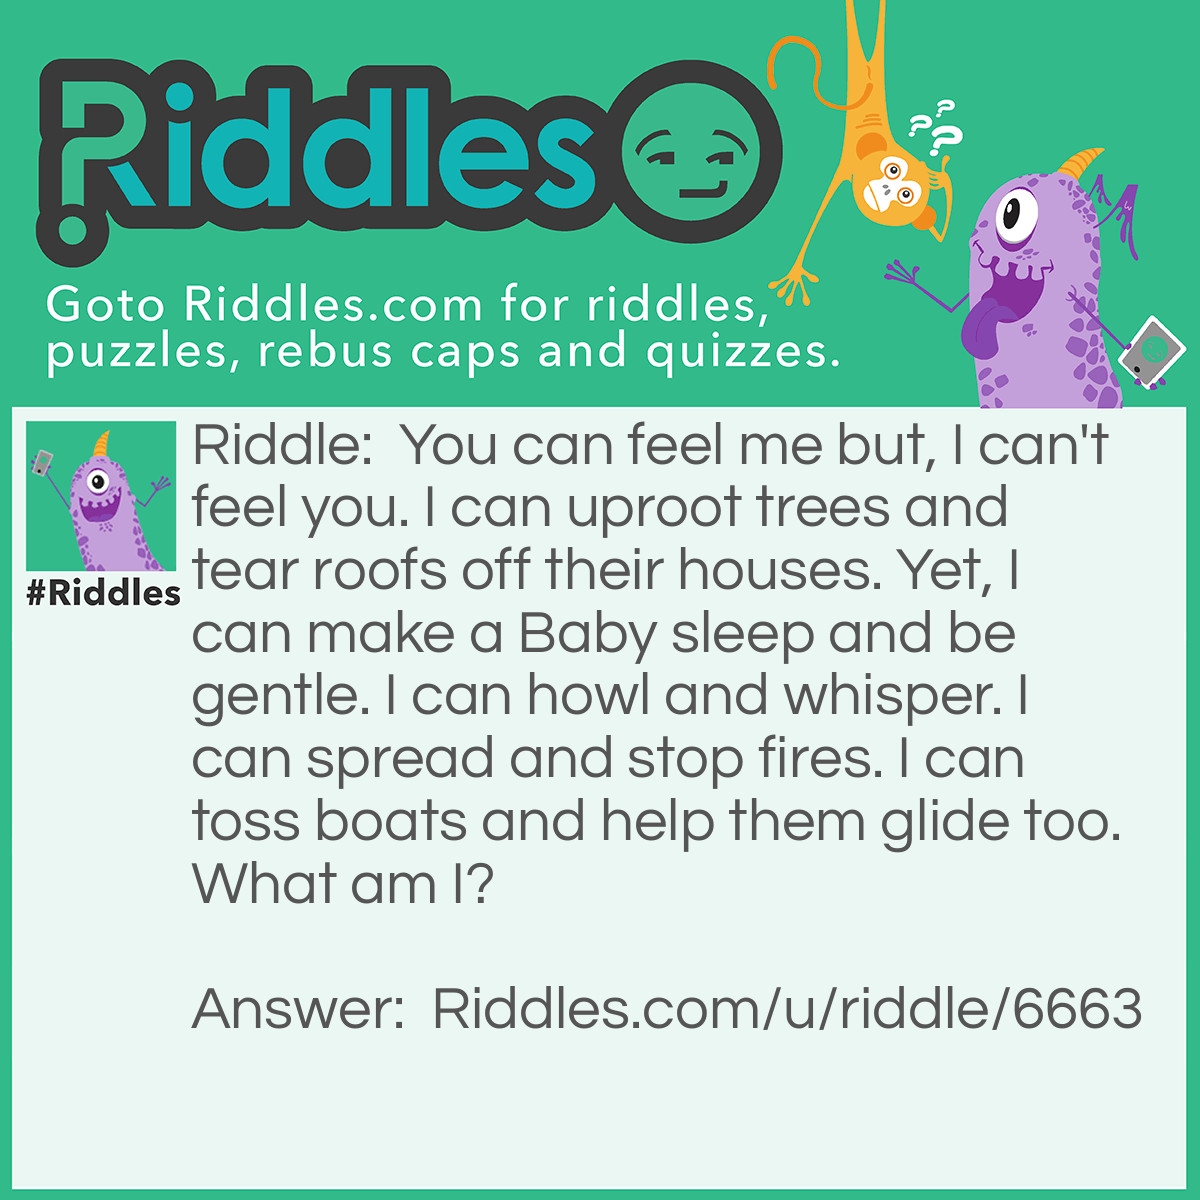 Riddle: You can feel me but, I can't feel you. I can uproot trees and tear roofs off their houses. Yet, I can make a Baby sleep and be gentle. I can howl and whisper. I can spread and stop fires. I can toss boats and help them glide too. What am I? Answer: I am the wind.